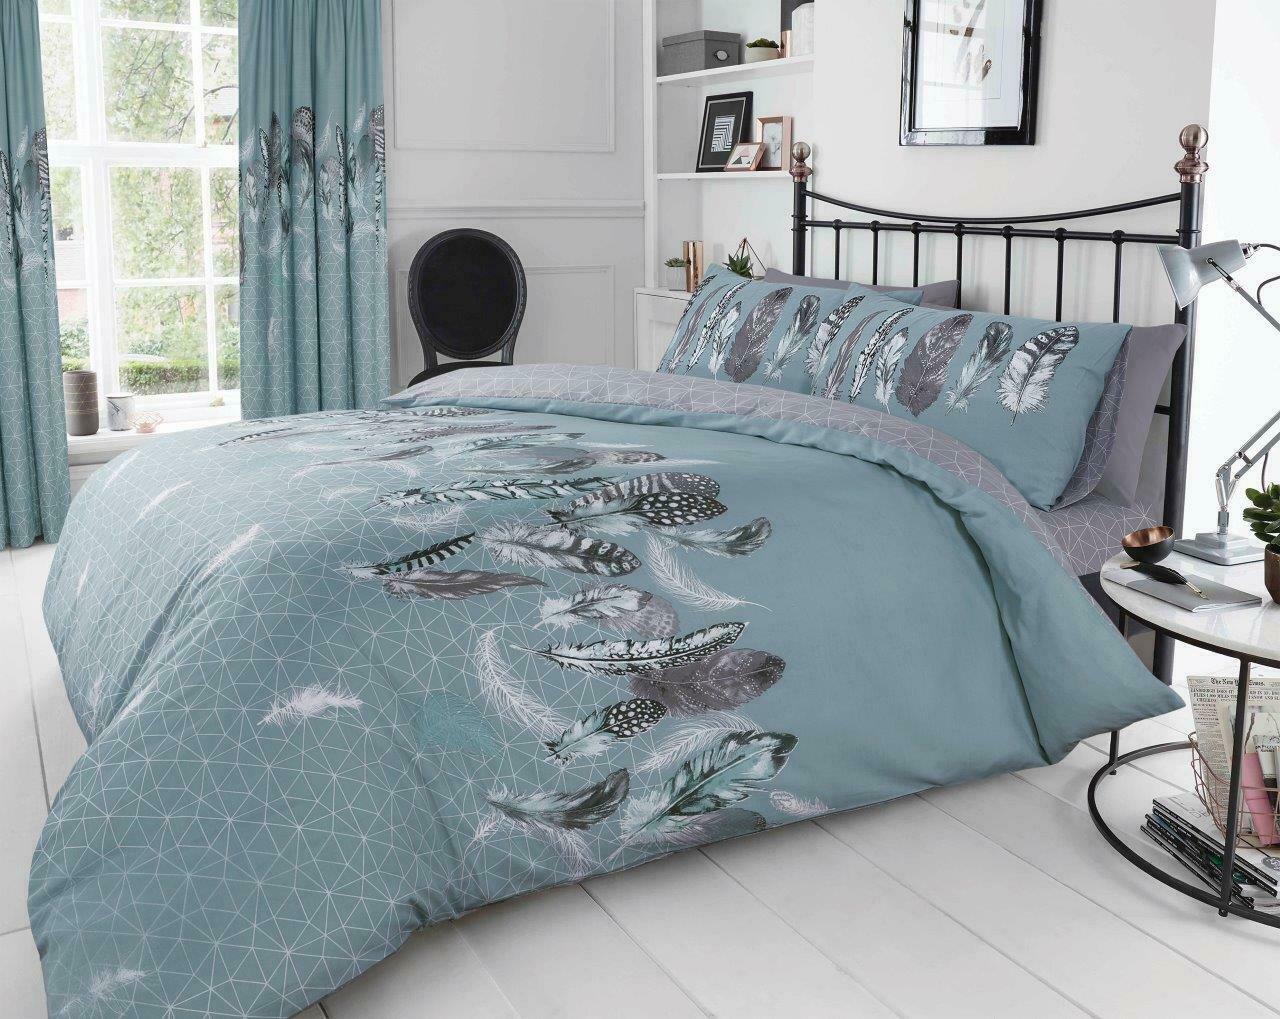 Printed Polycotton Feathers Duvet Cover With Pillowcases